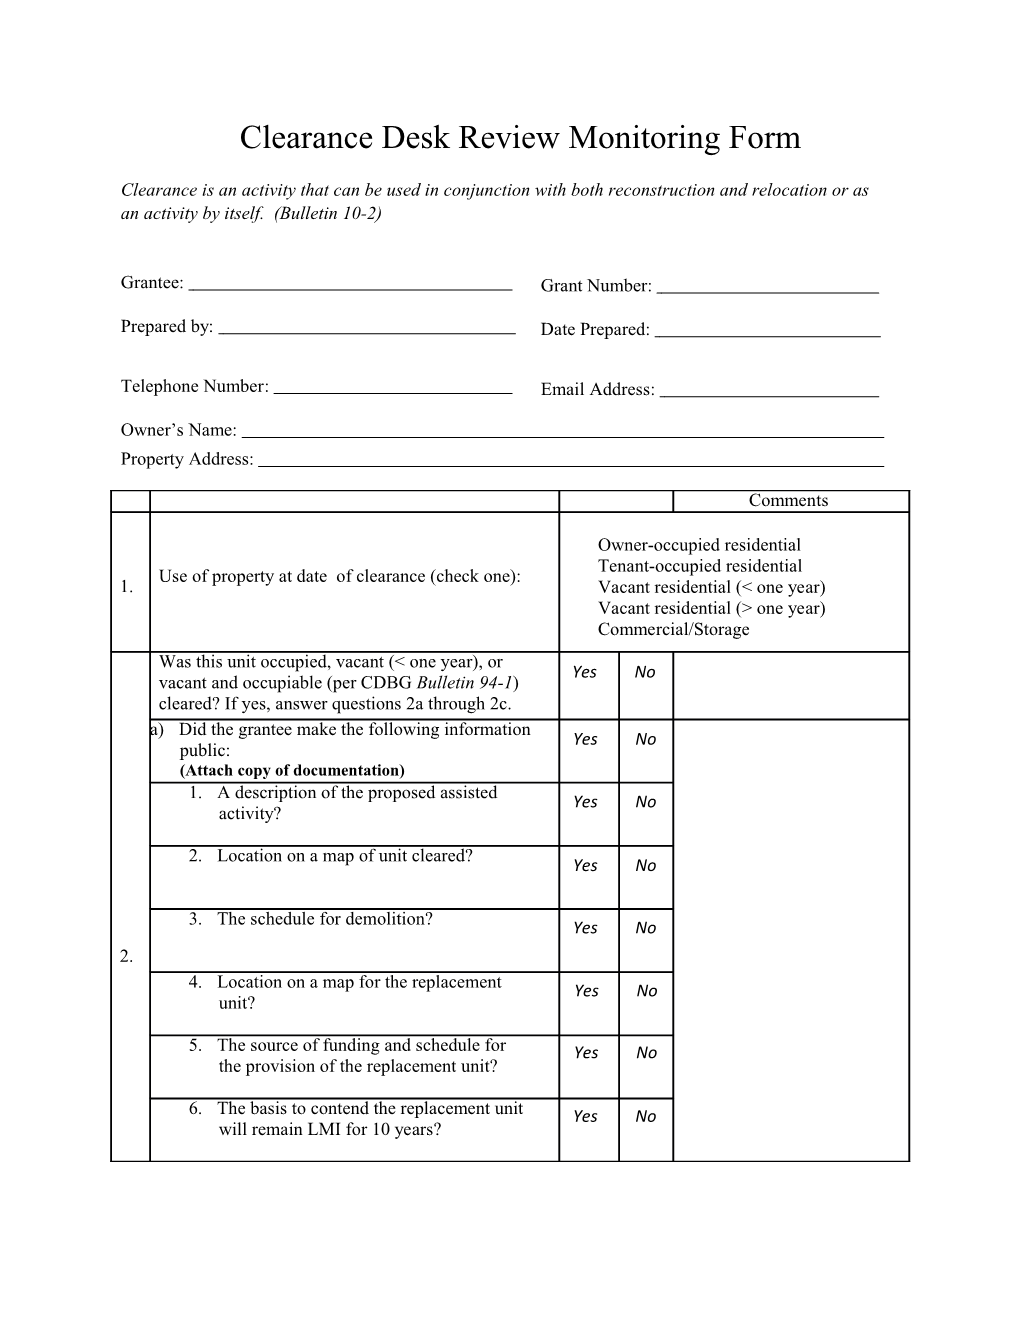 Clearance Desk Review Monitoring Form